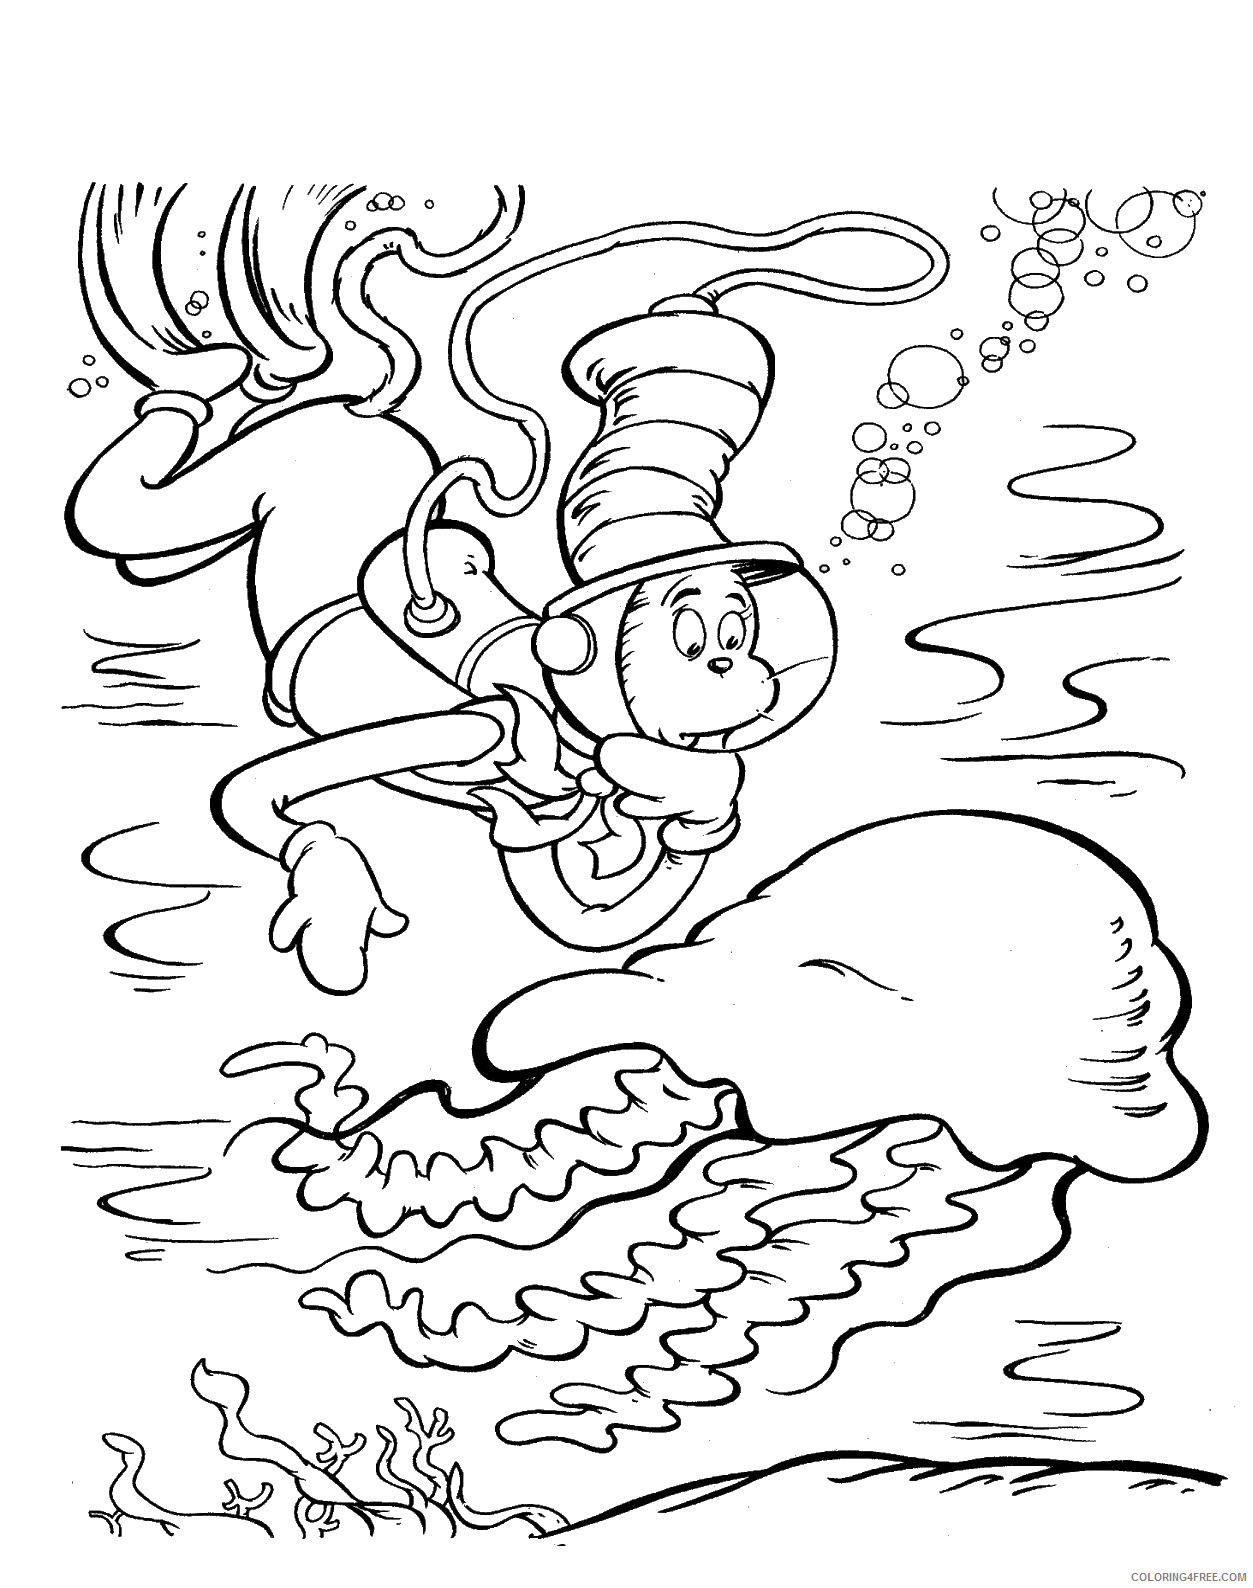 The Cat in the Hat Coloring Pages Cartoons cat_hat_cl_26 Printable 2020 6389 Coloring4free